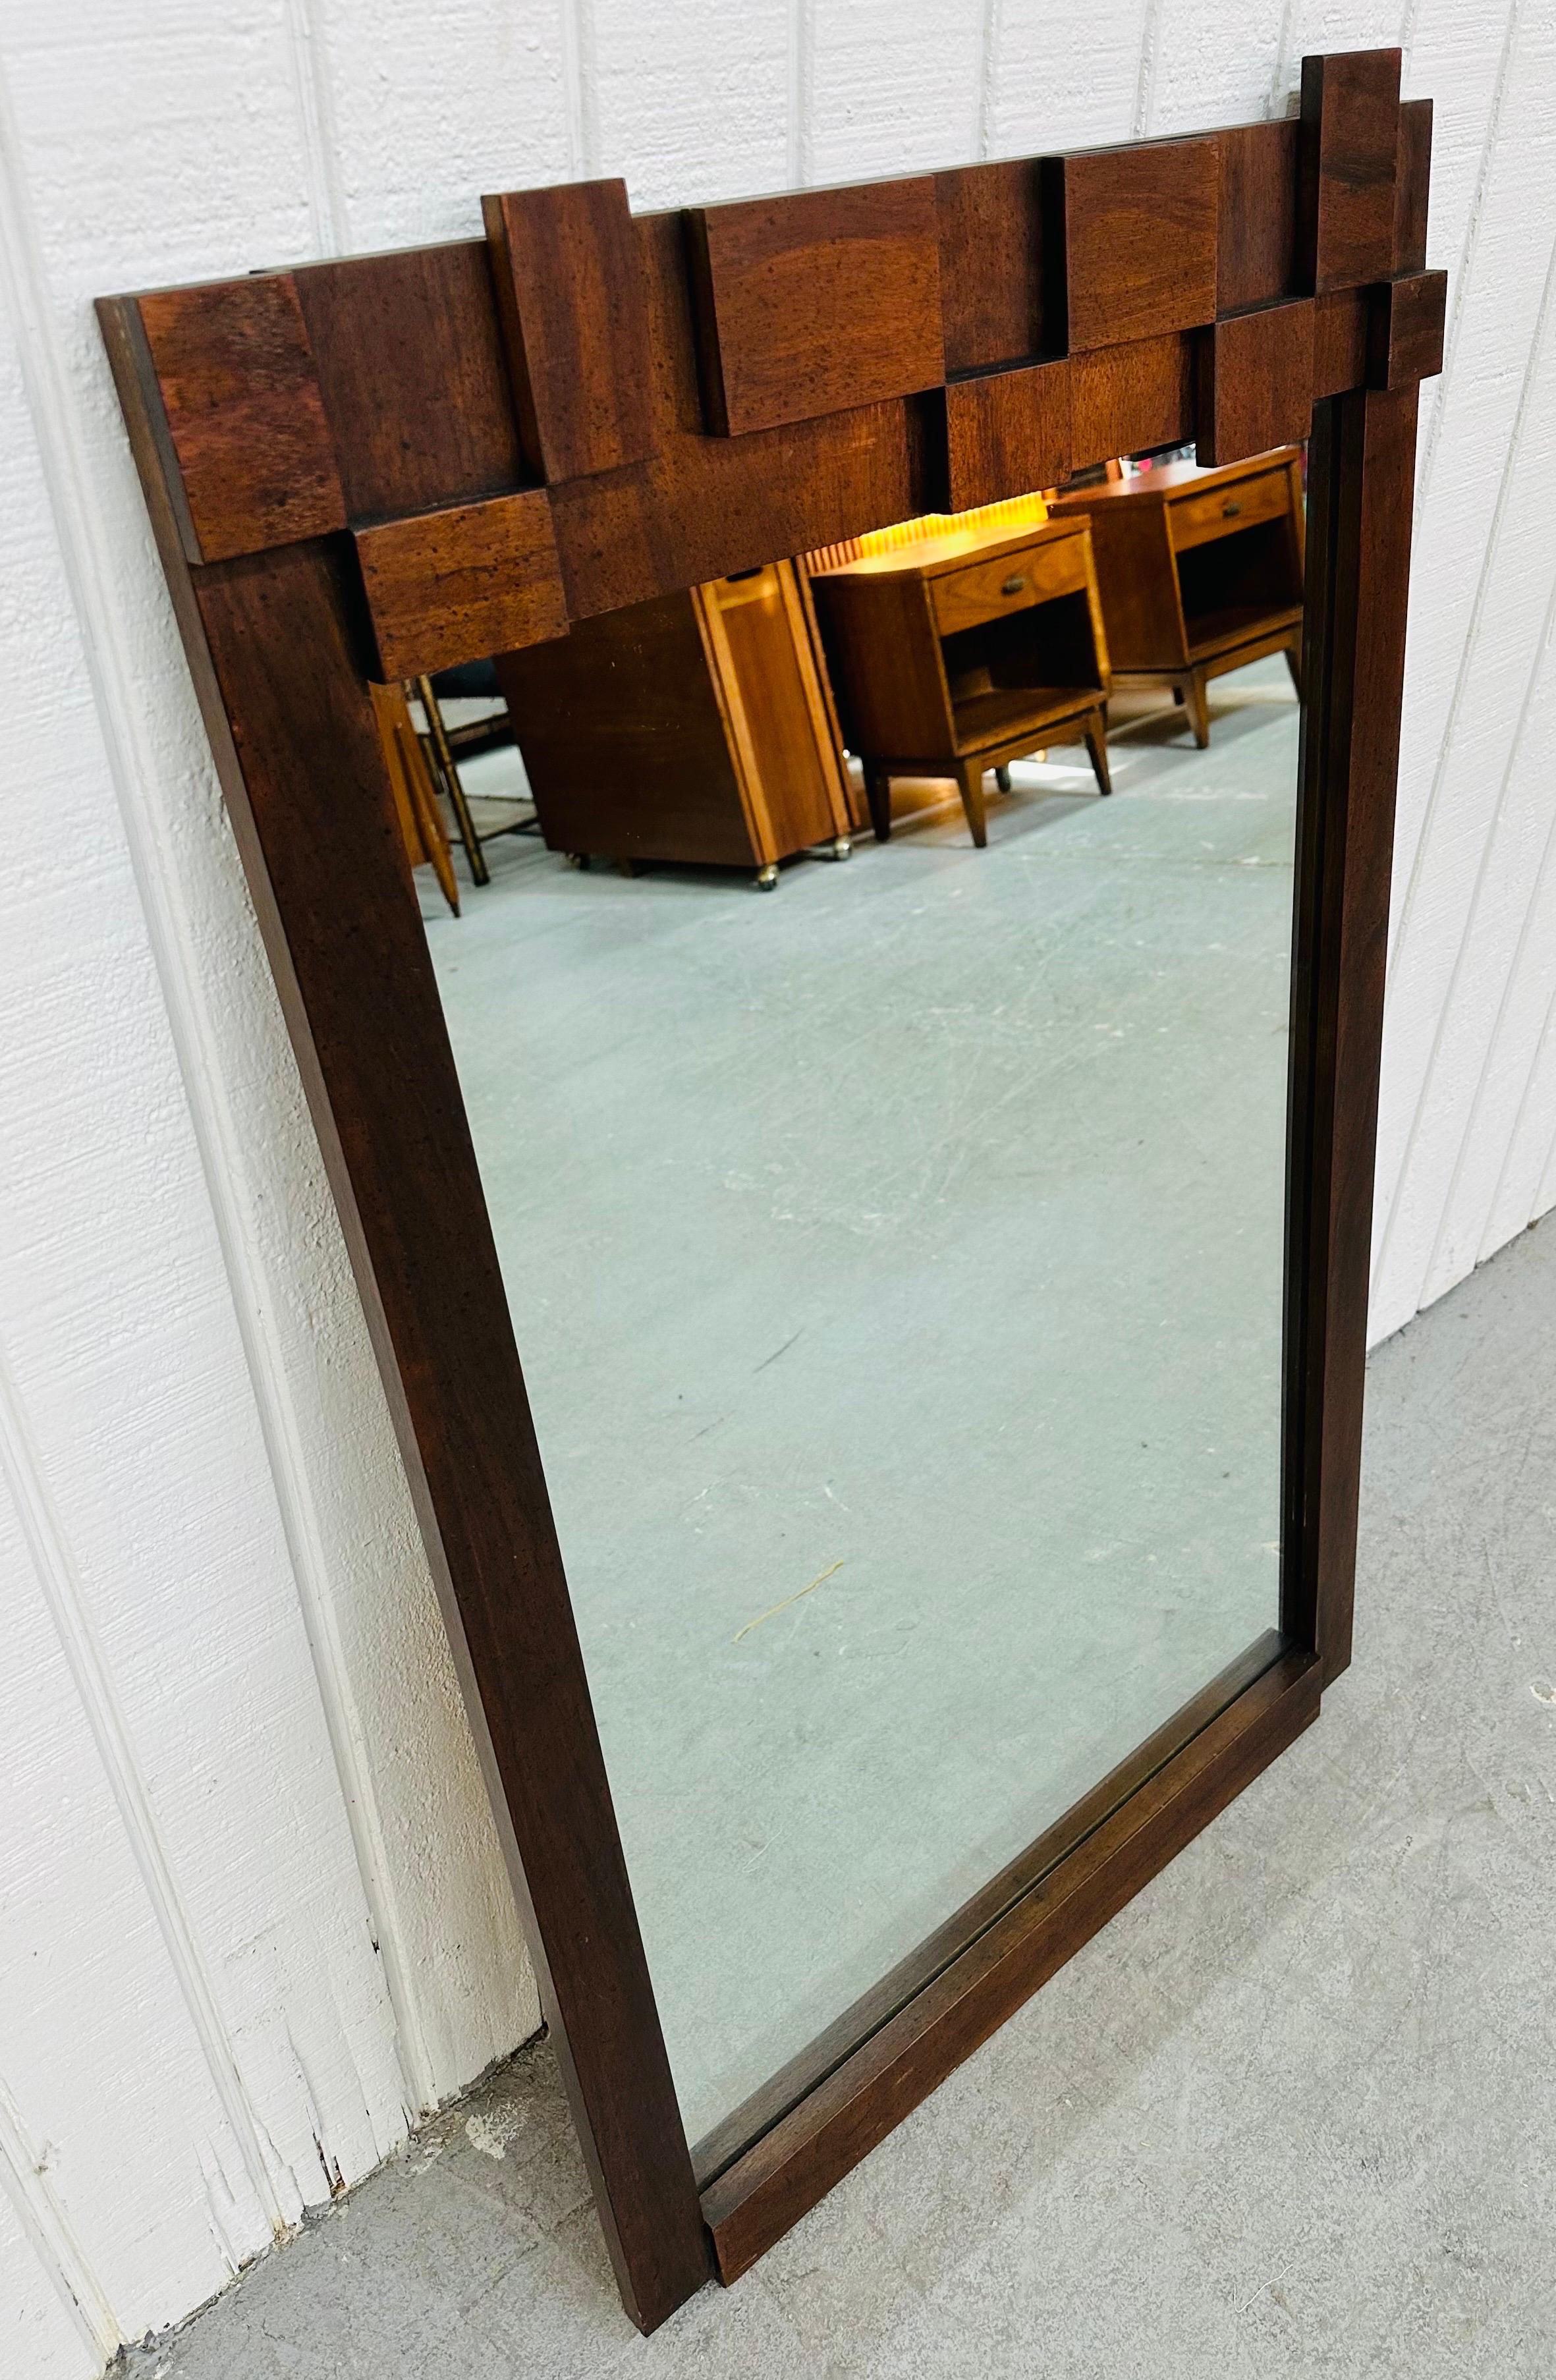 This listing is for a Mid-Century Modern Lane Brutalist Walnut Wall Mirror. Featuring a straight line rectangular design, brutalist block front top, walnut frame, and original mirror. This is an exceptional combination of quality and design by Lane!